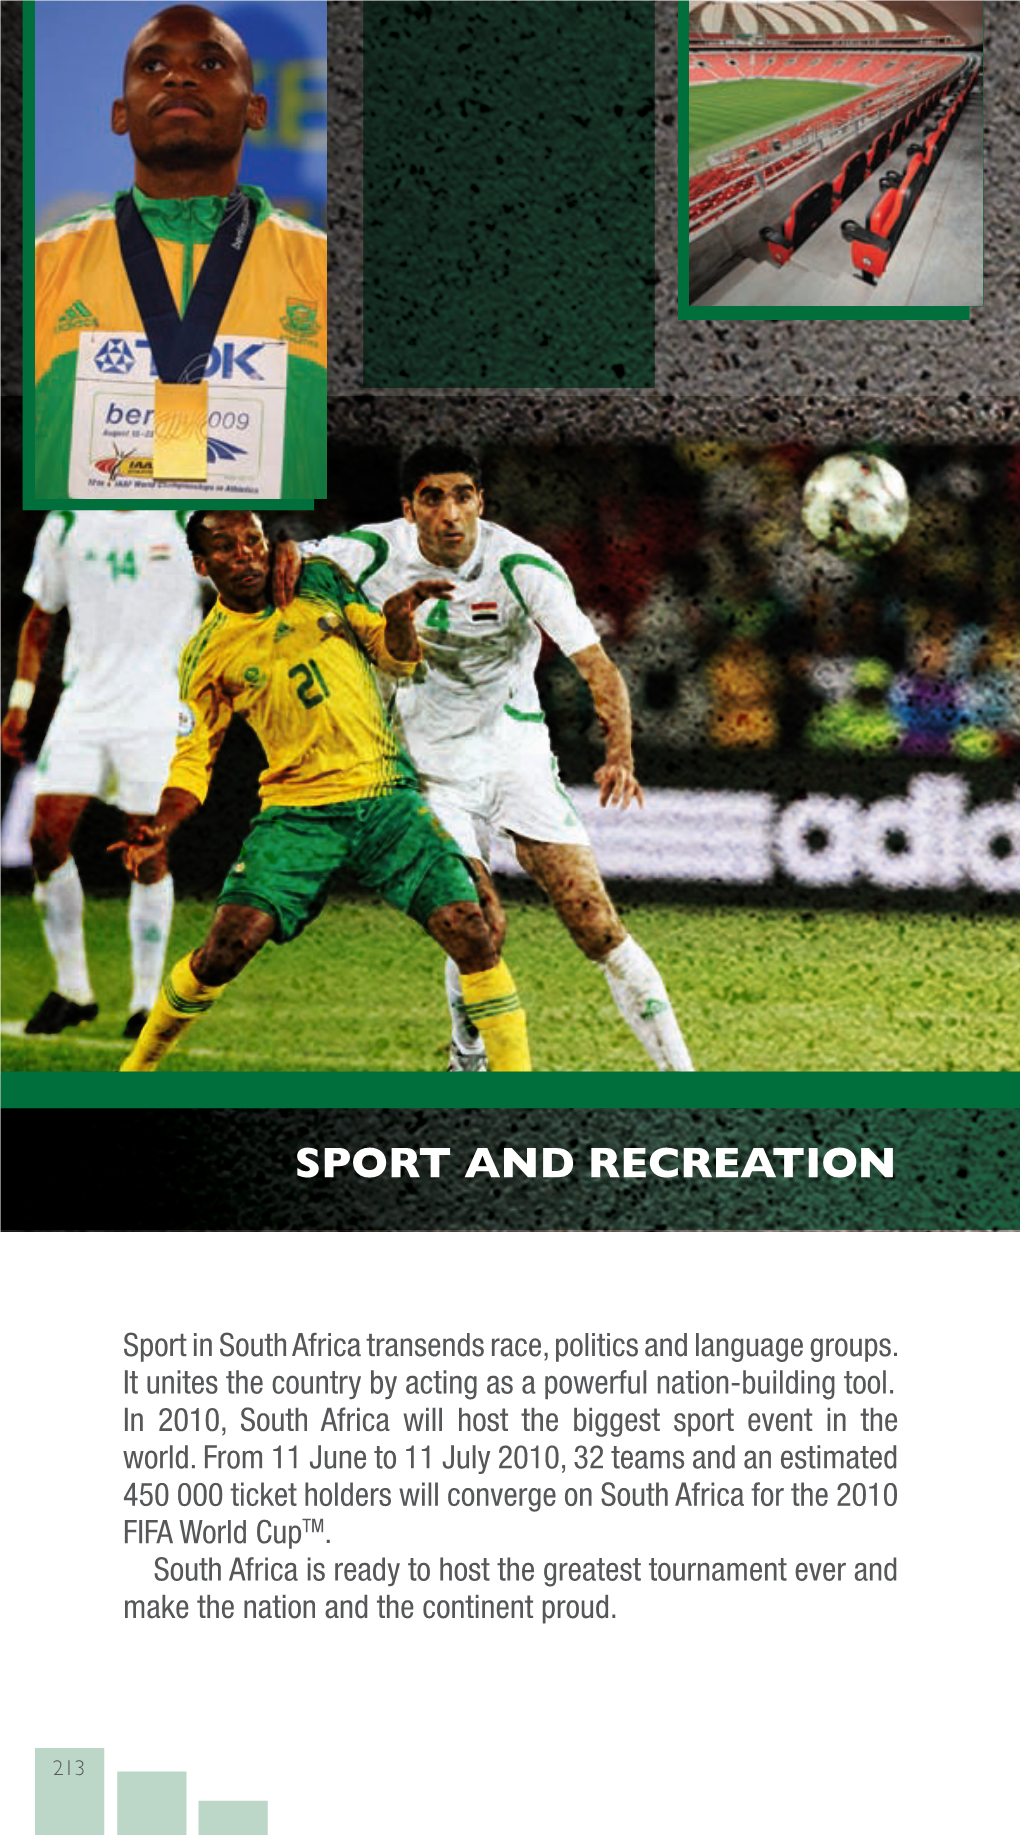 Pocket Guide to South Africa 2009/2010: Sport and Recreation